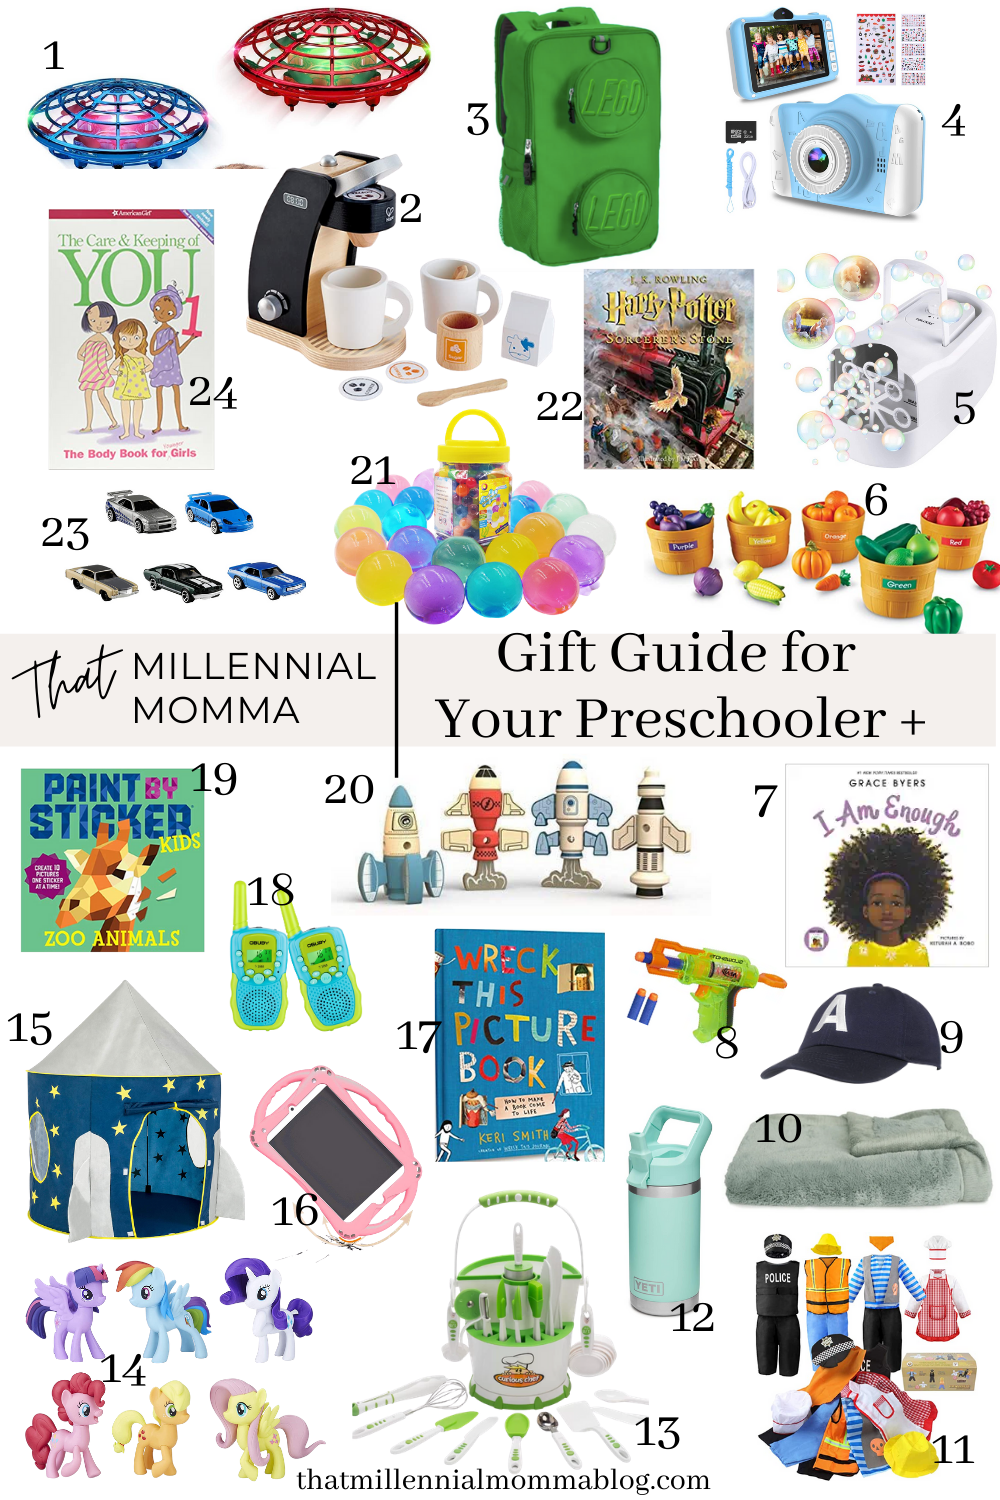 Gift Guide for Preschool Girls (Ages 3-5)